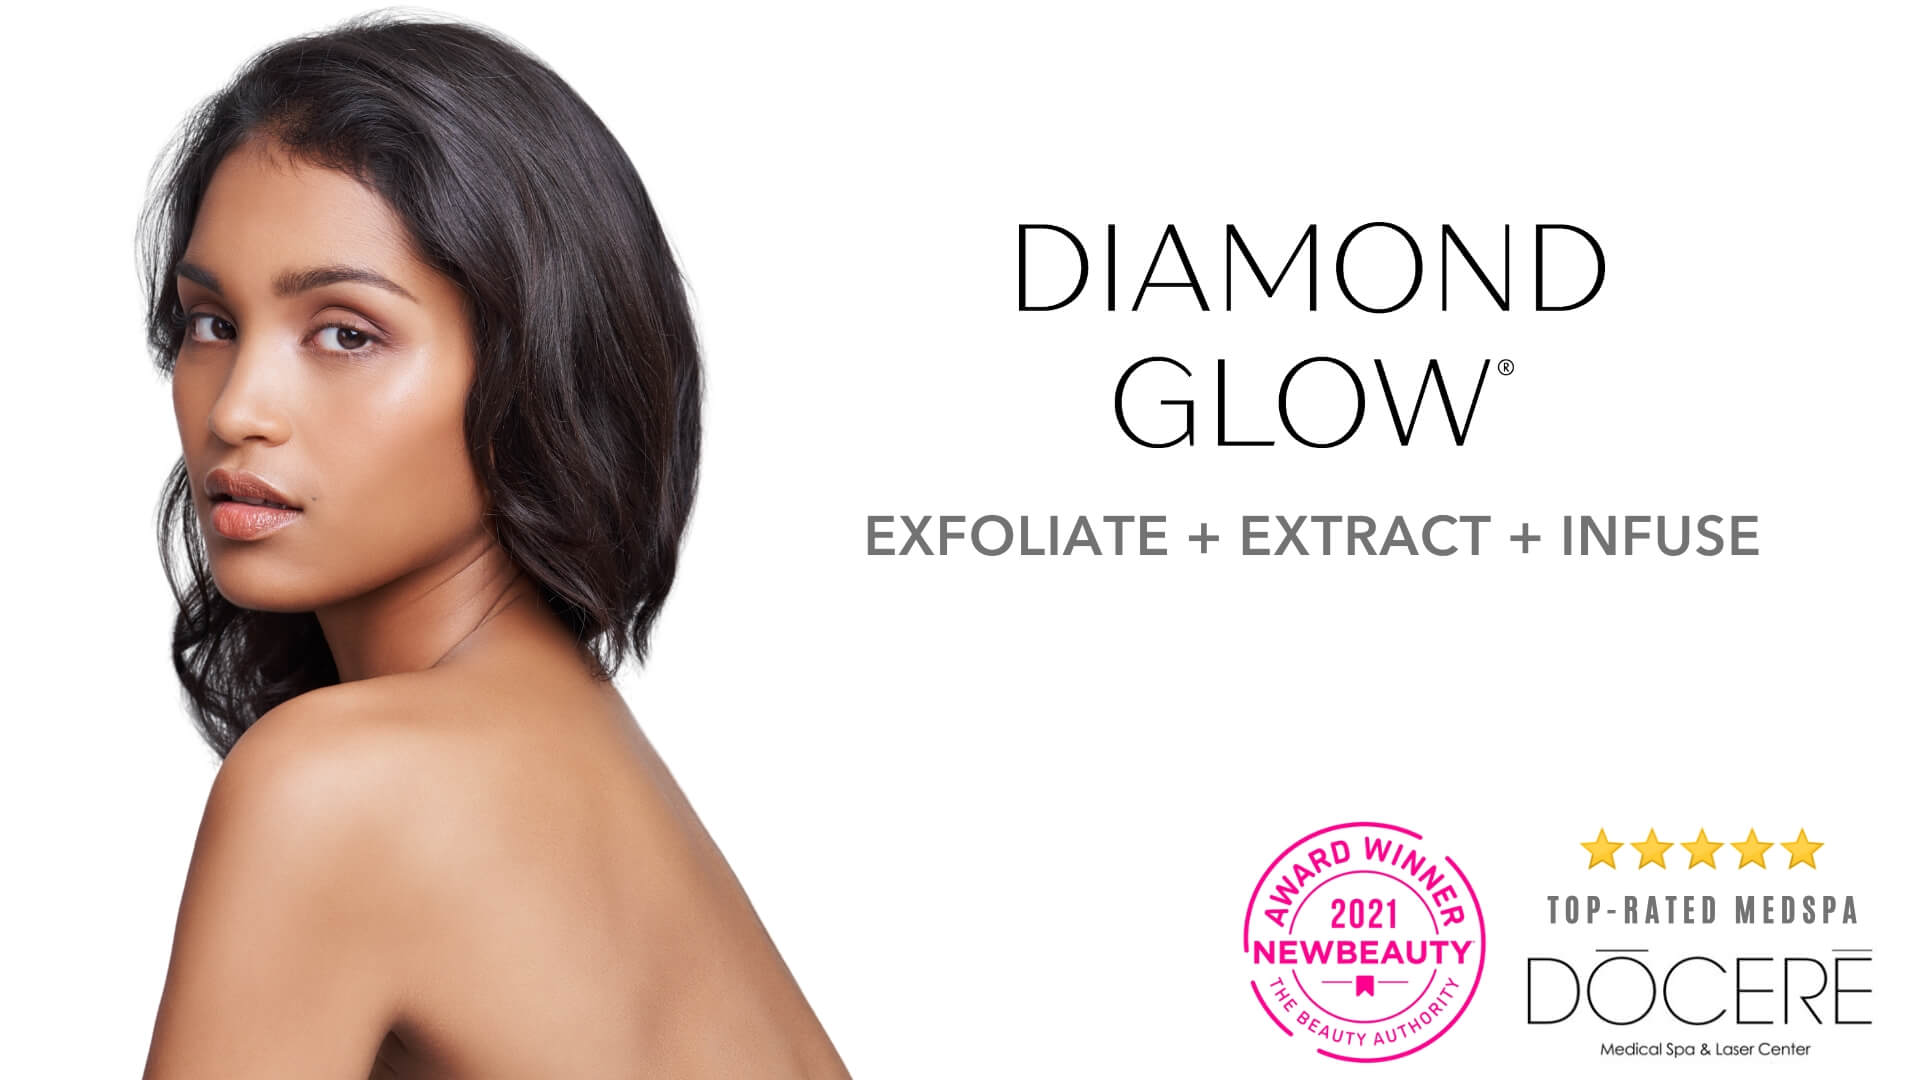 Beautiful woman with clear, glowing skin models benefits of Diamond Glow facial in Strongsville, Ohio.